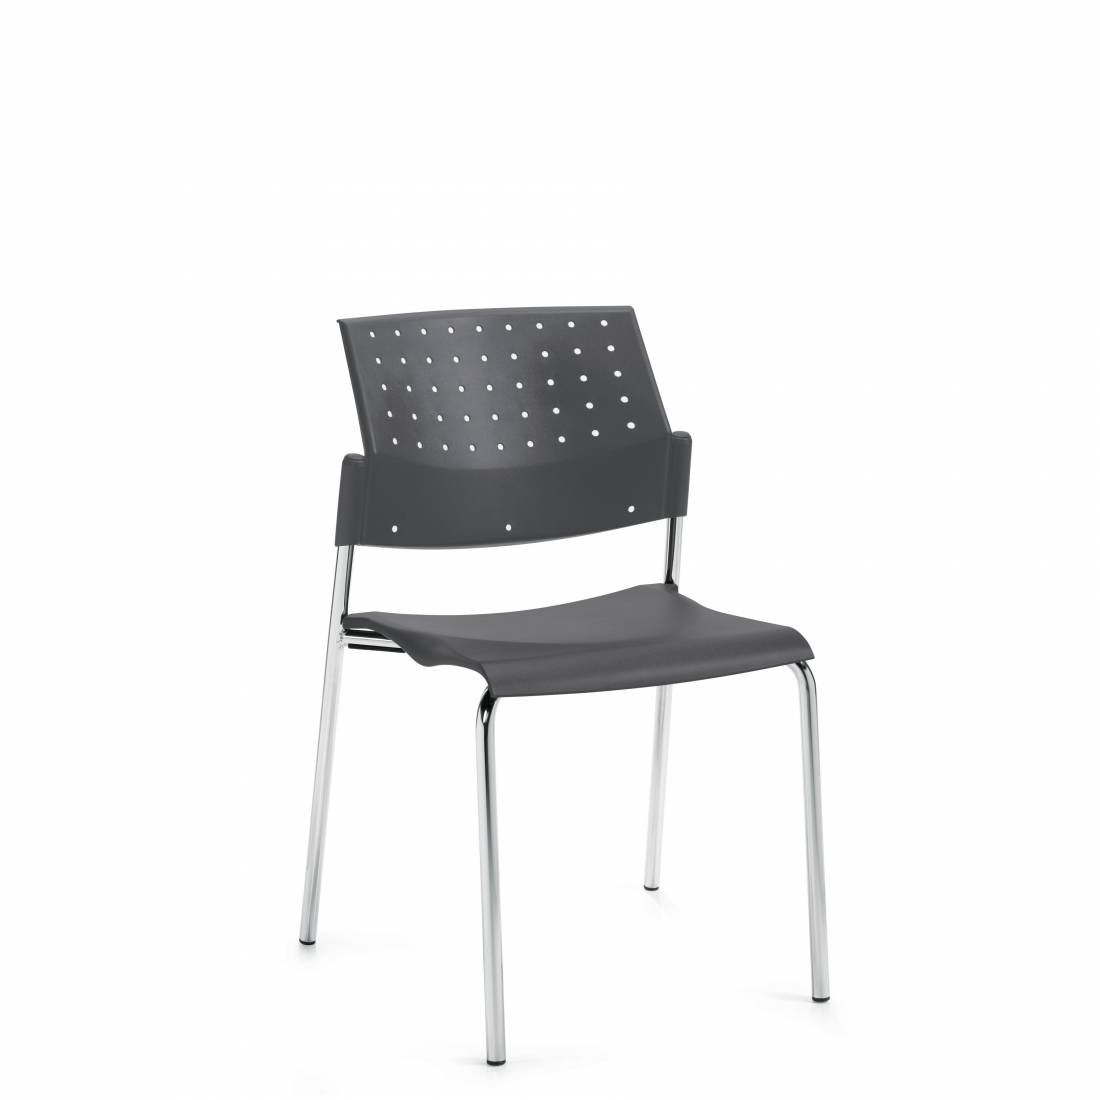 Armless Stacking Chair, Polypropylene Seat & Back